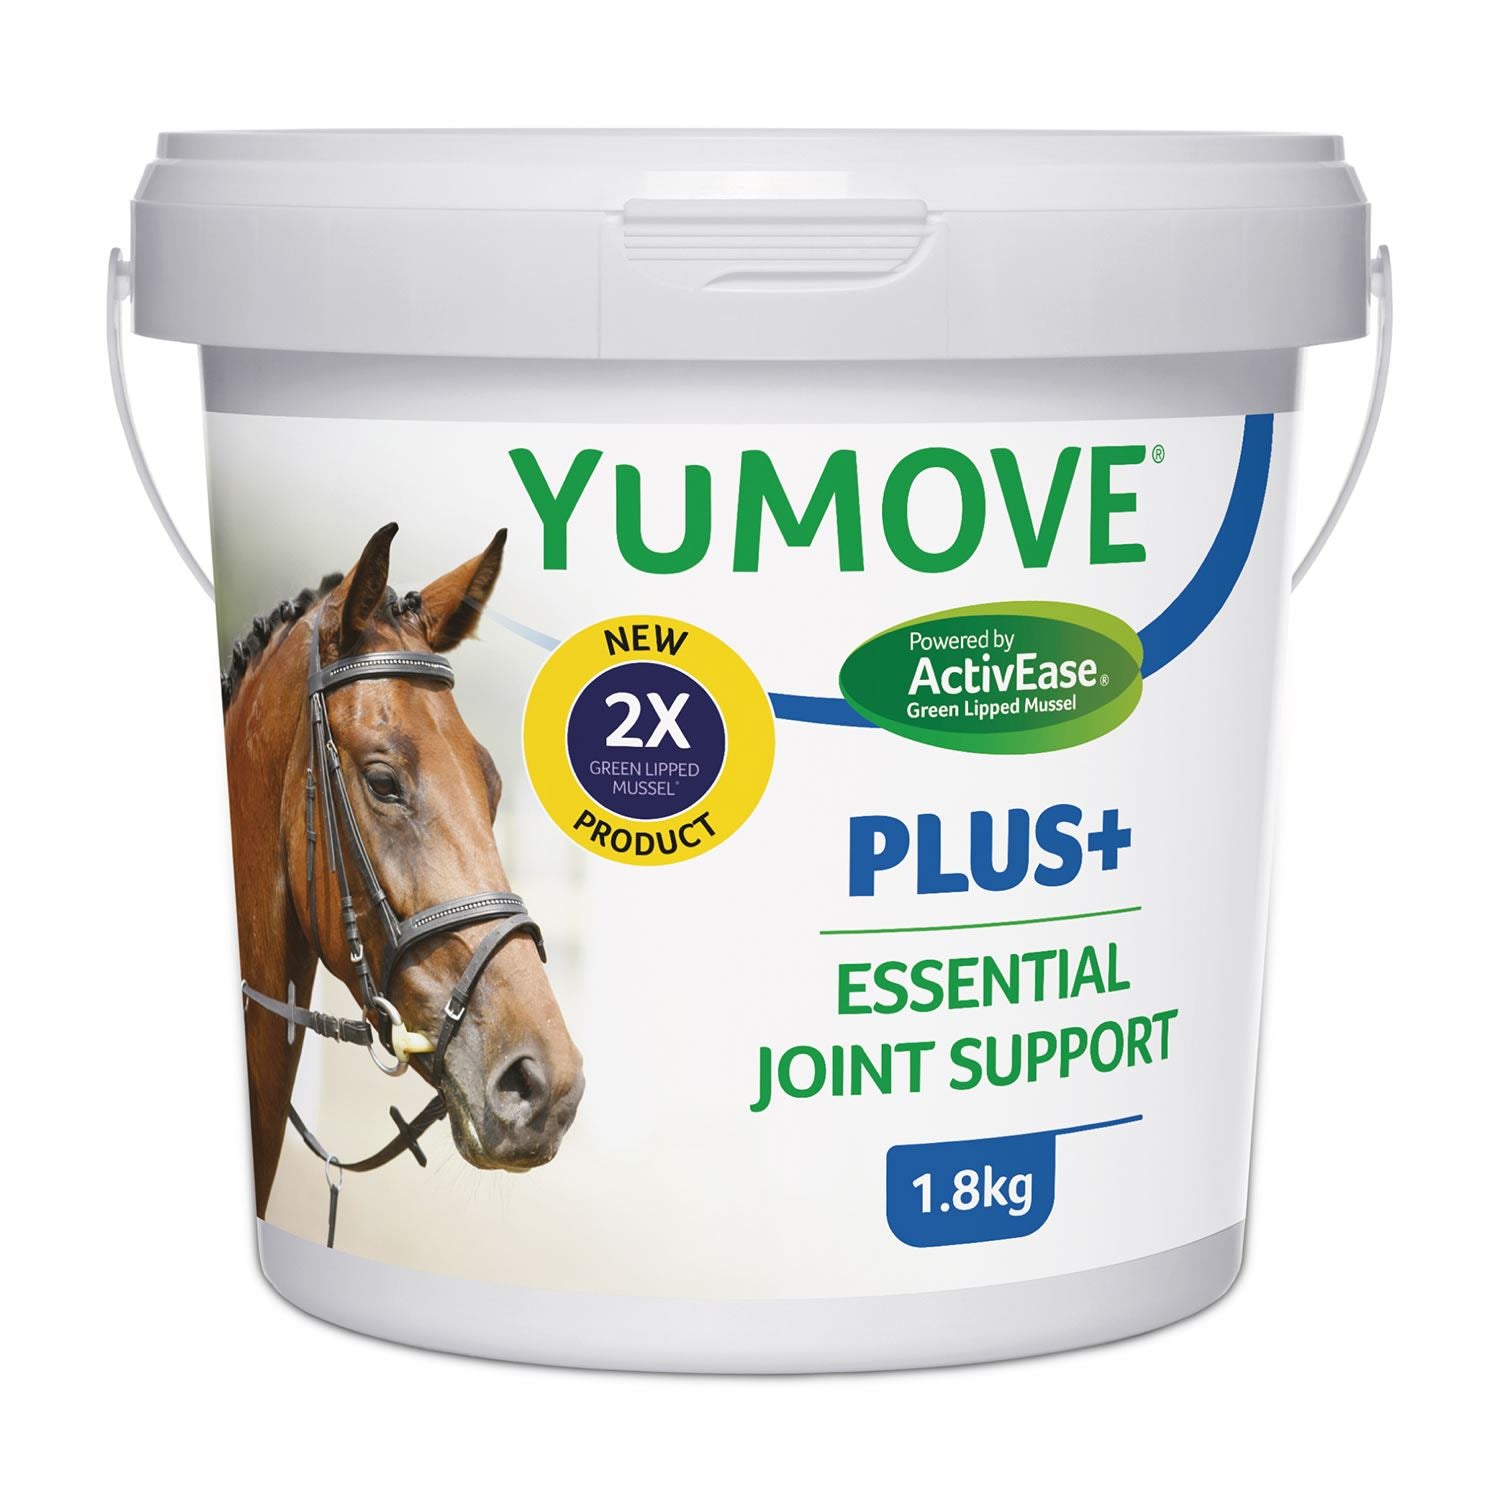 Lintbells Yumove Horse Plus+ Essential Joint Support - Just Horse Riders